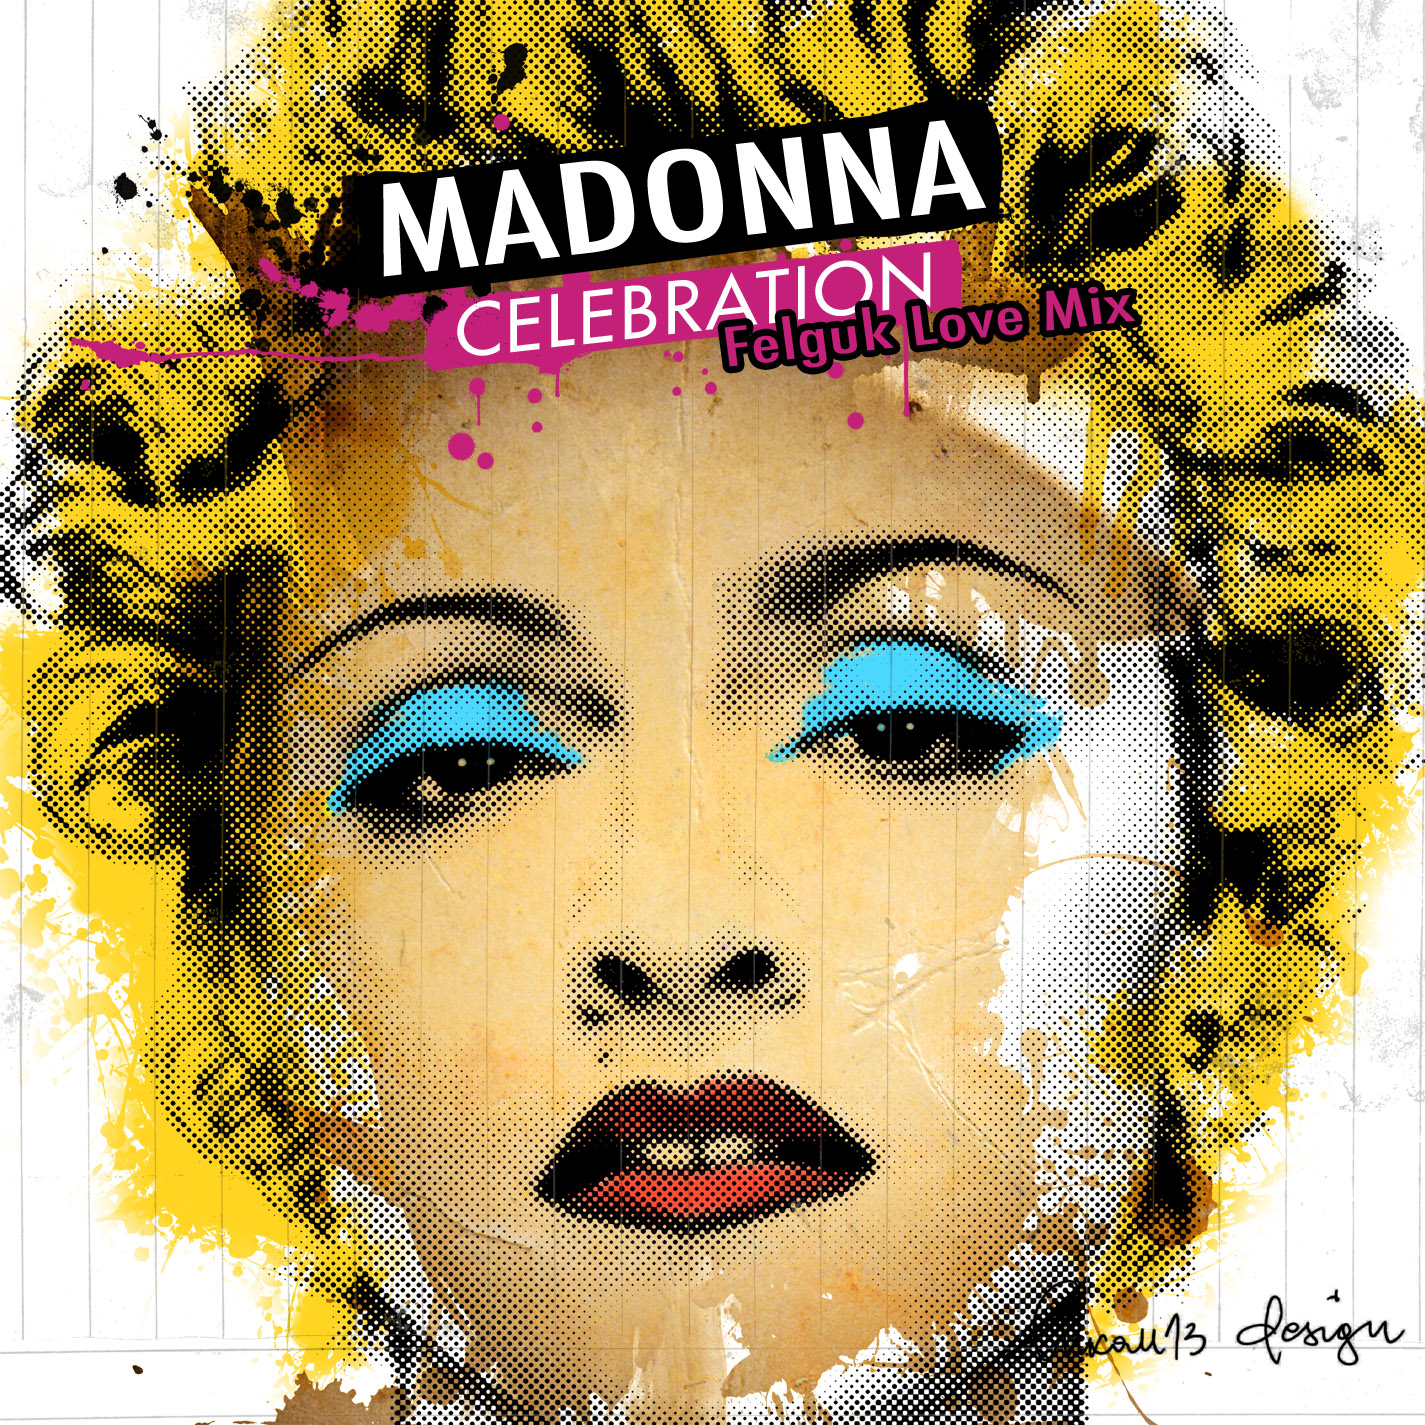 Madonna FanMade Covers: Madonna - Vinyl